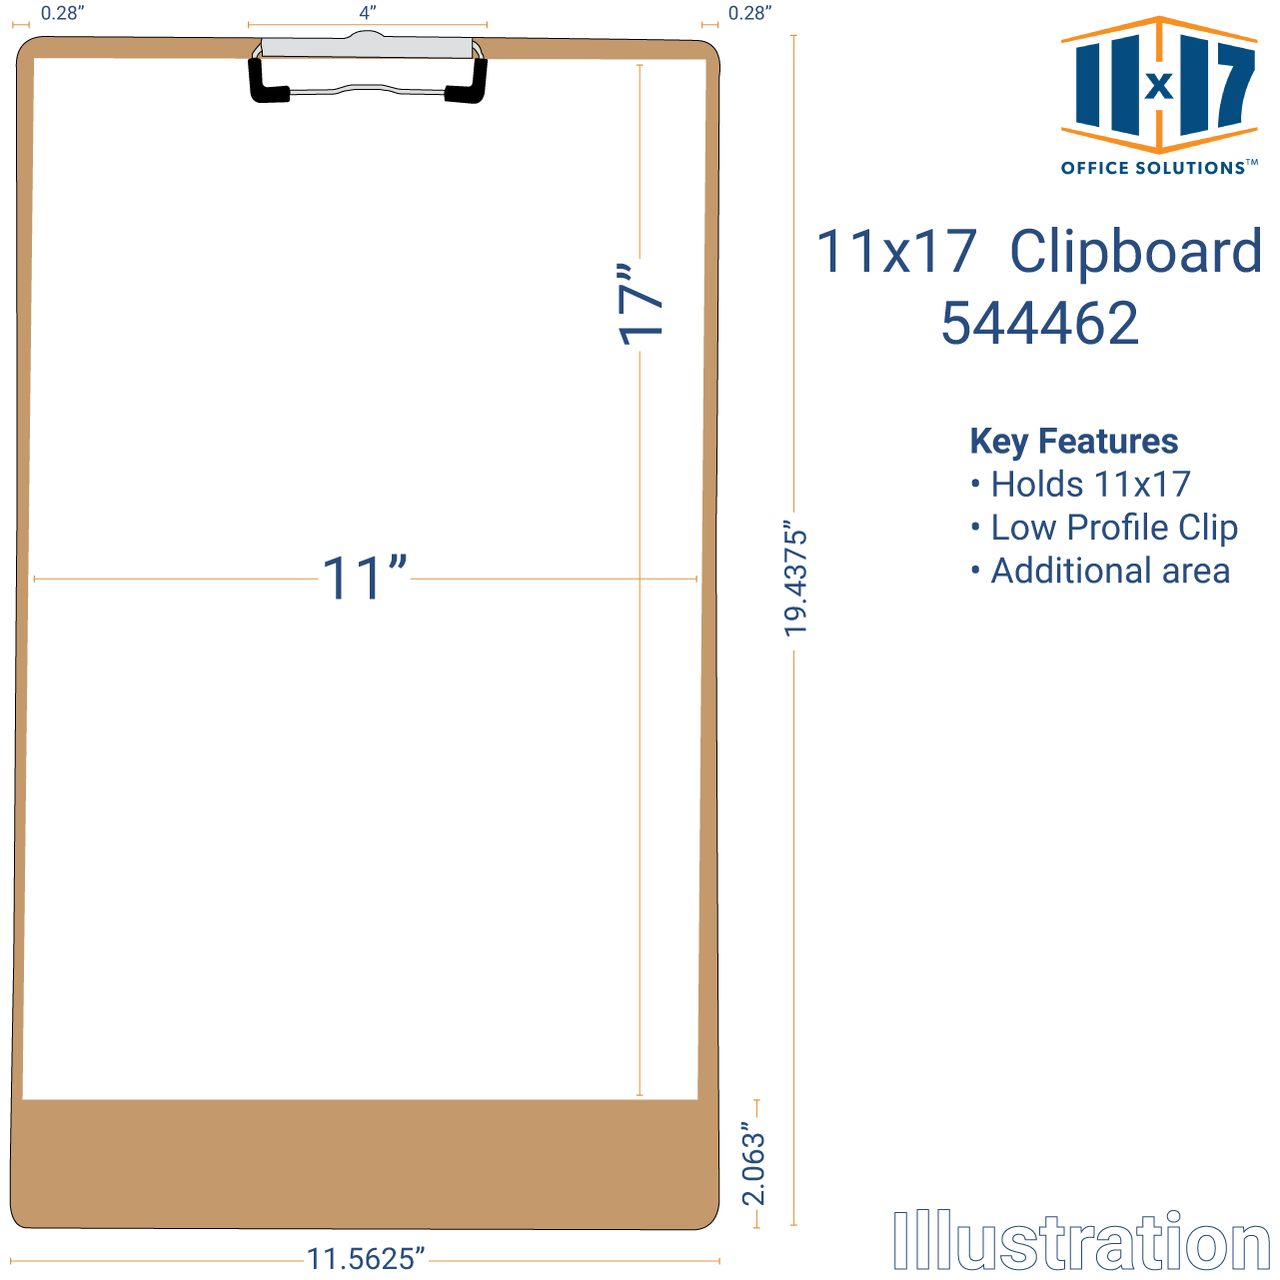 Illustration of the 11x17 Clipboard light brown with low profile clip